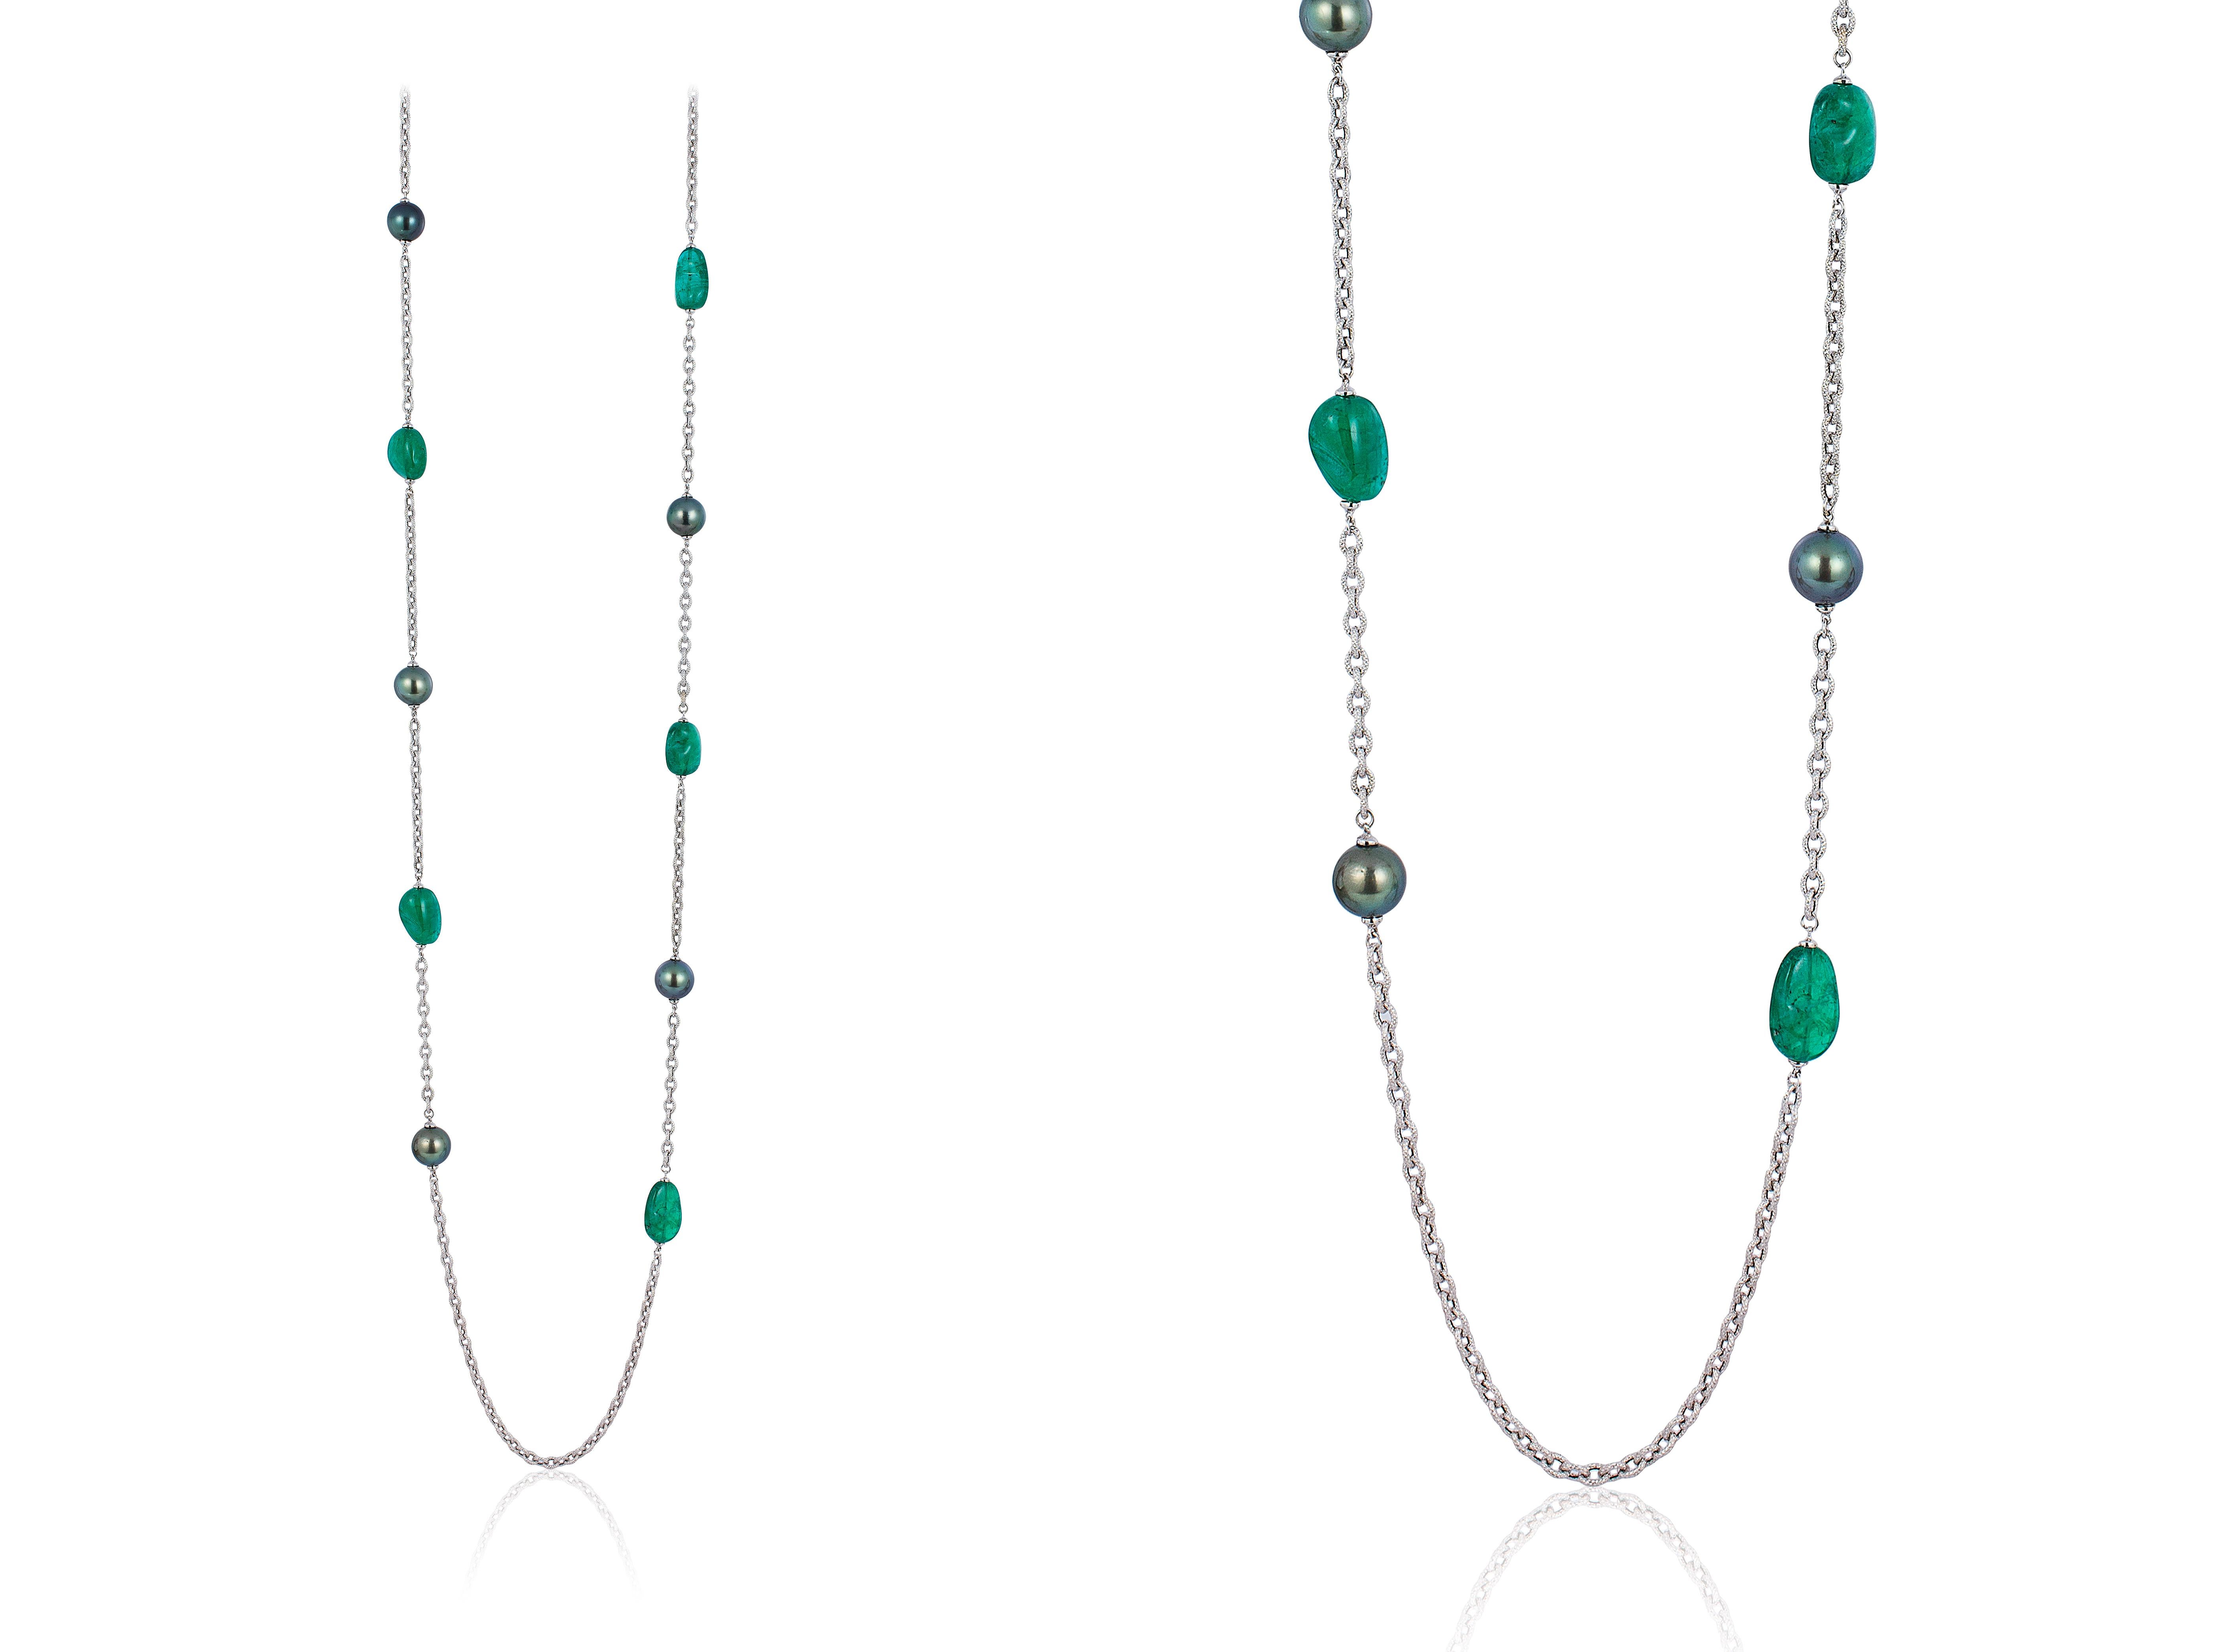 Emerald Tumble with Grey Tahitian Pearl Necklace in 18K White Gold from 'G-One' Collection

Approx. Length: 36